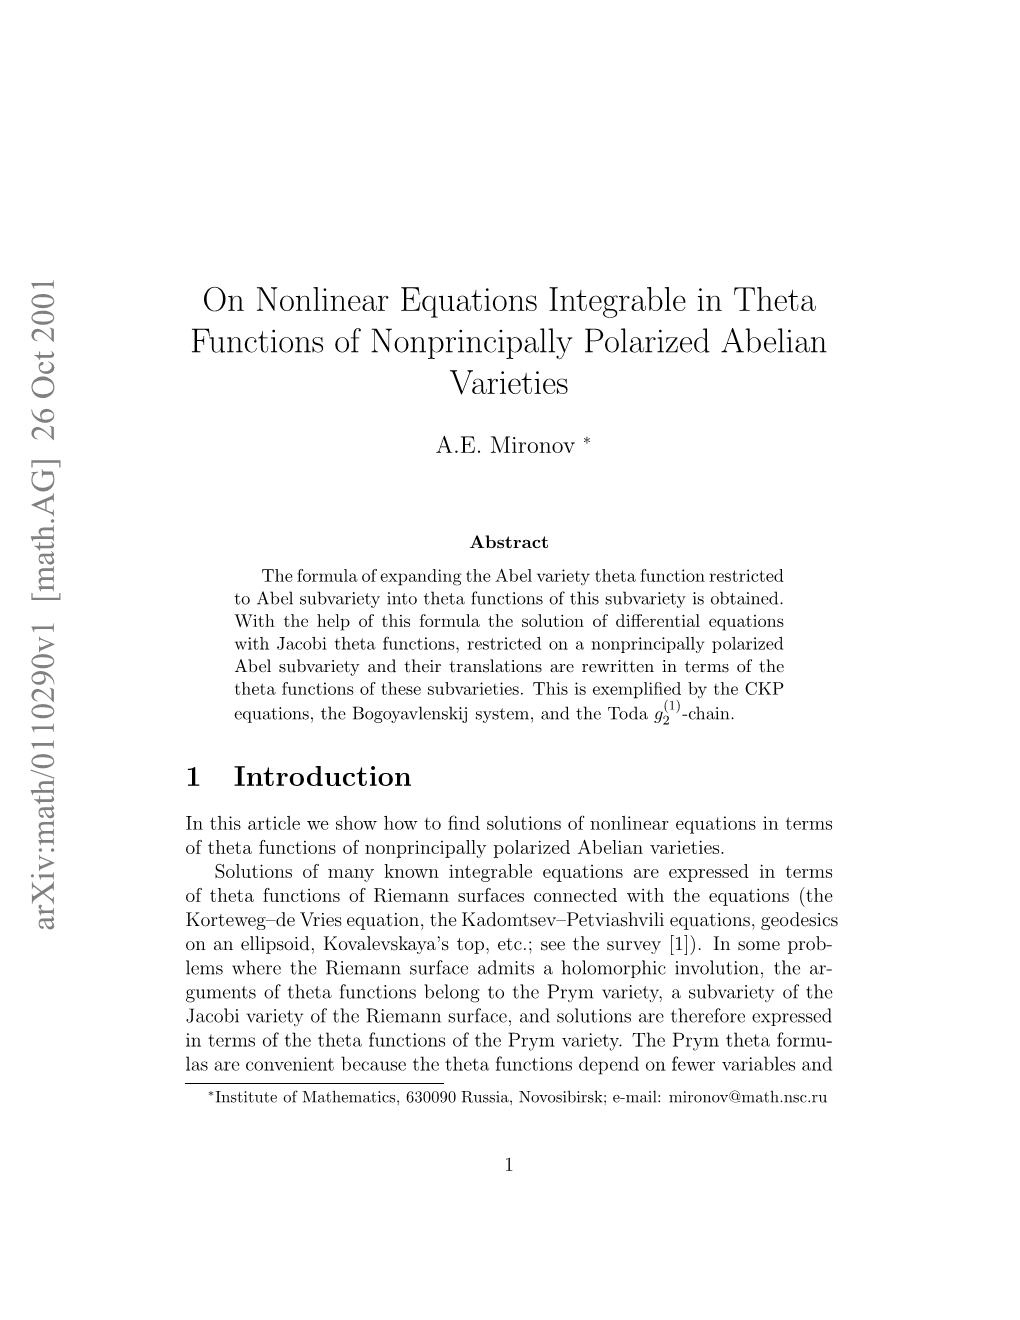 On Nonlinear Equations Integrable in Theta Functions of Nonprincipally